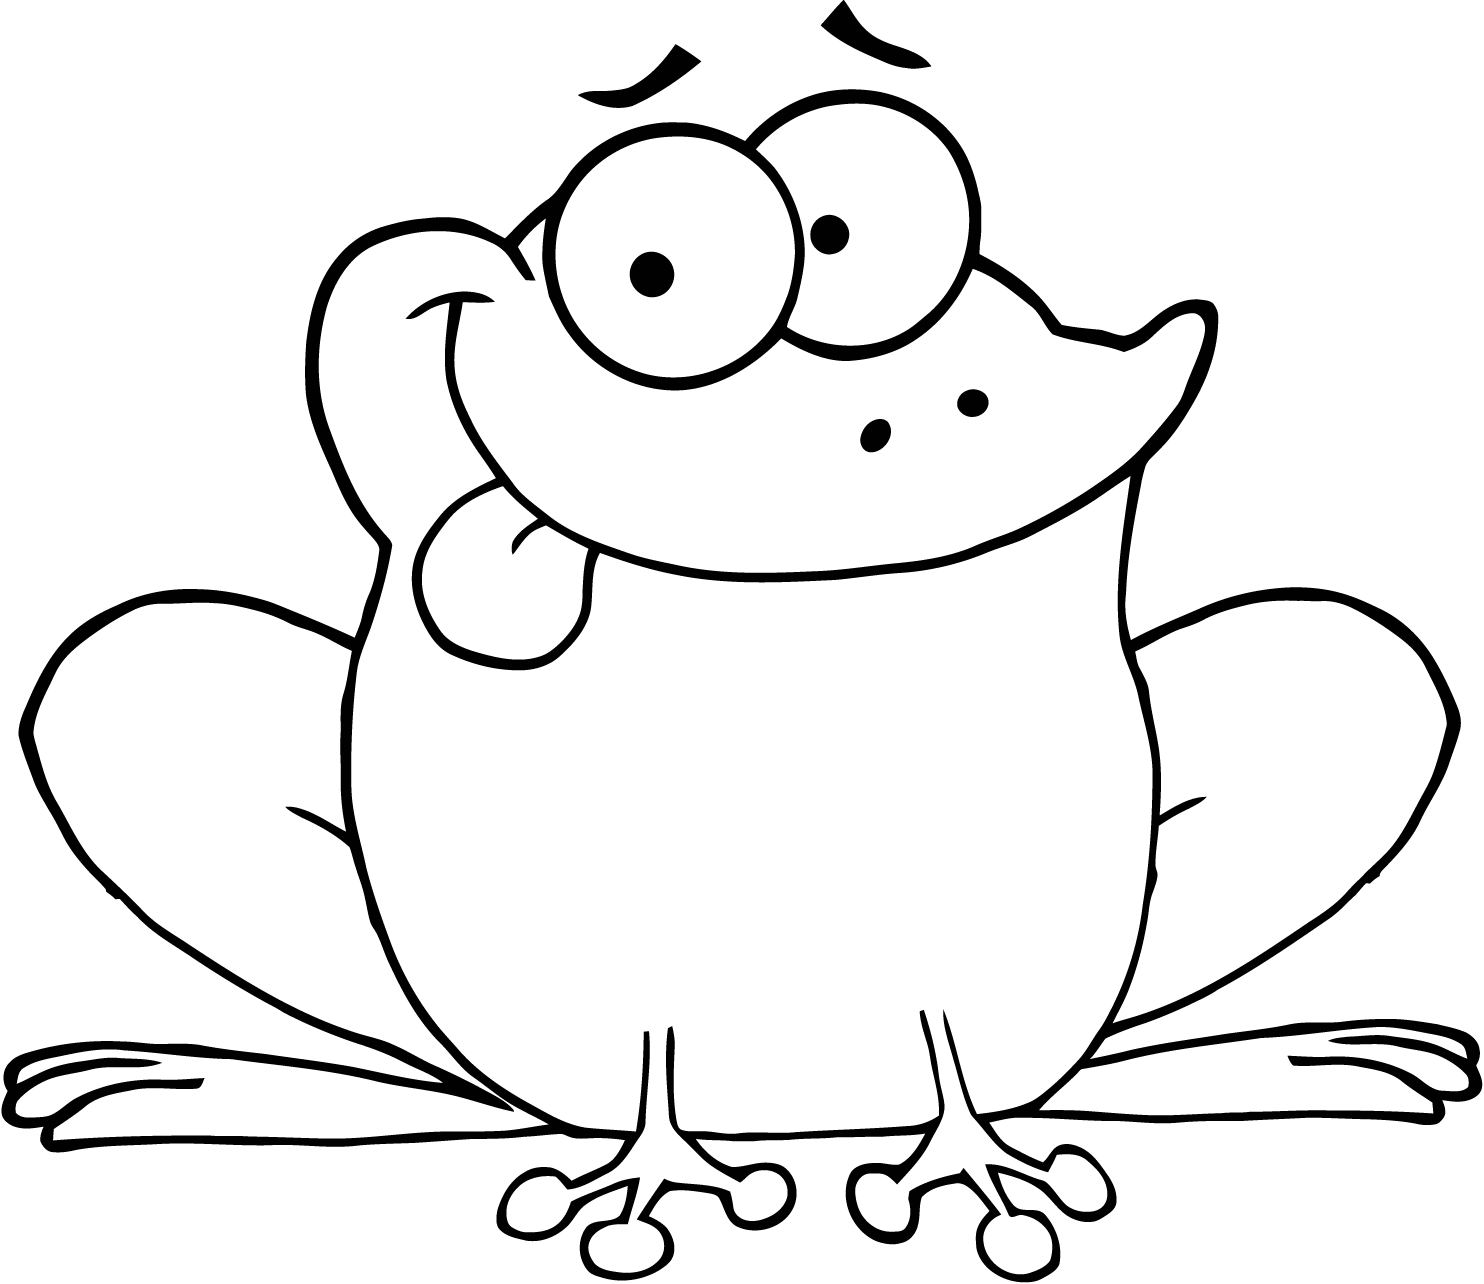 Tree frog coloring pages - Coloring Pages & Pictures - IMAGIXS